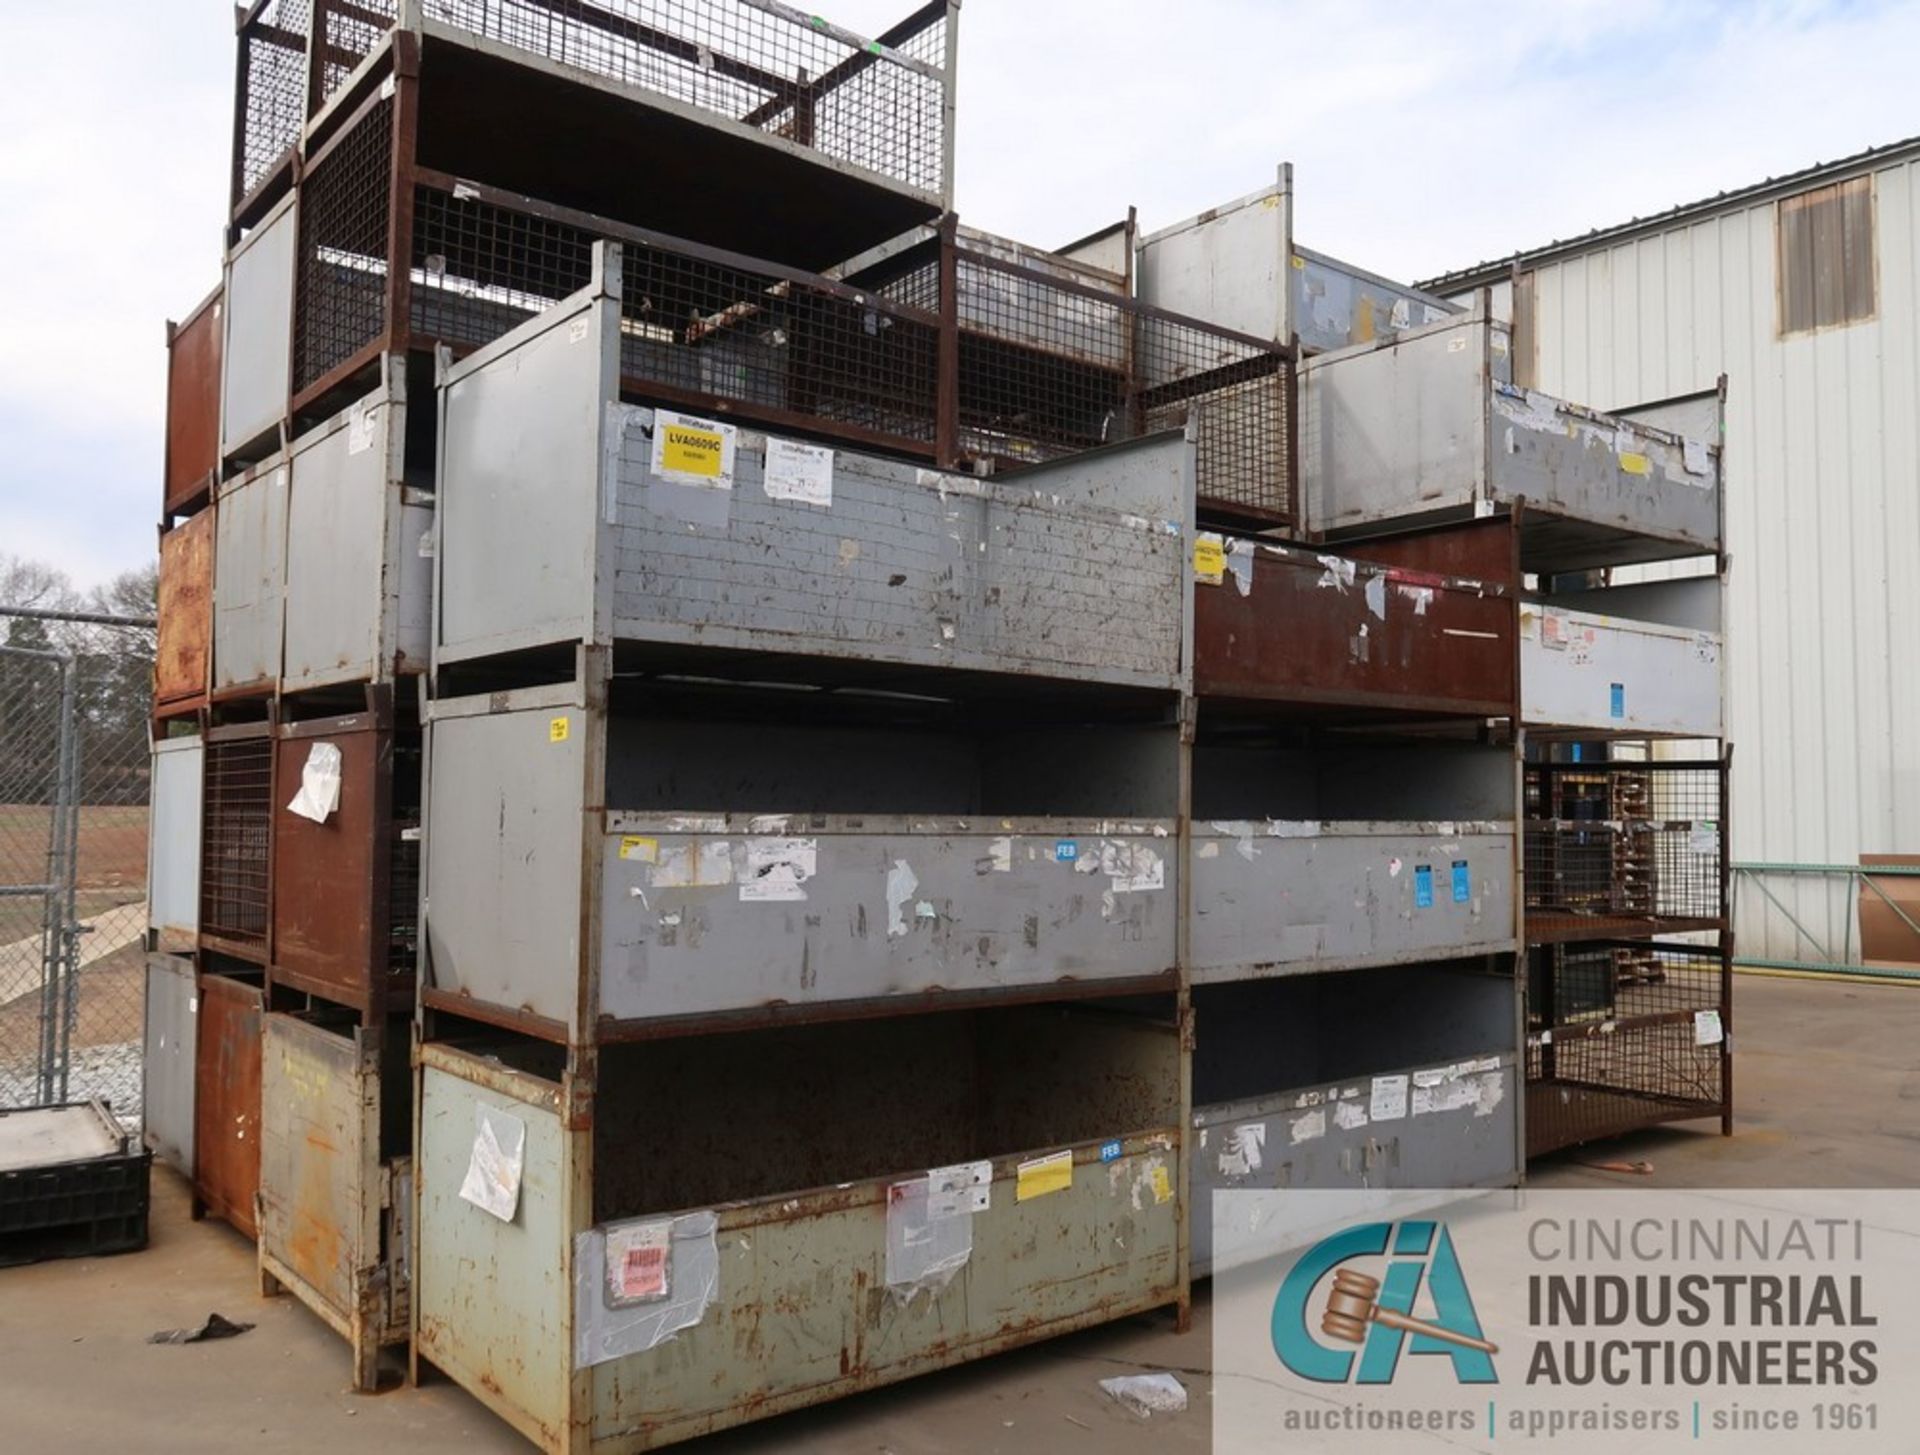 40" FRONT TO BACK X 80" LEFT TO RIGHT X 39" HIGH STACKABLE STEEL CONTAINERS - SEE LOT NO. 584A FOR